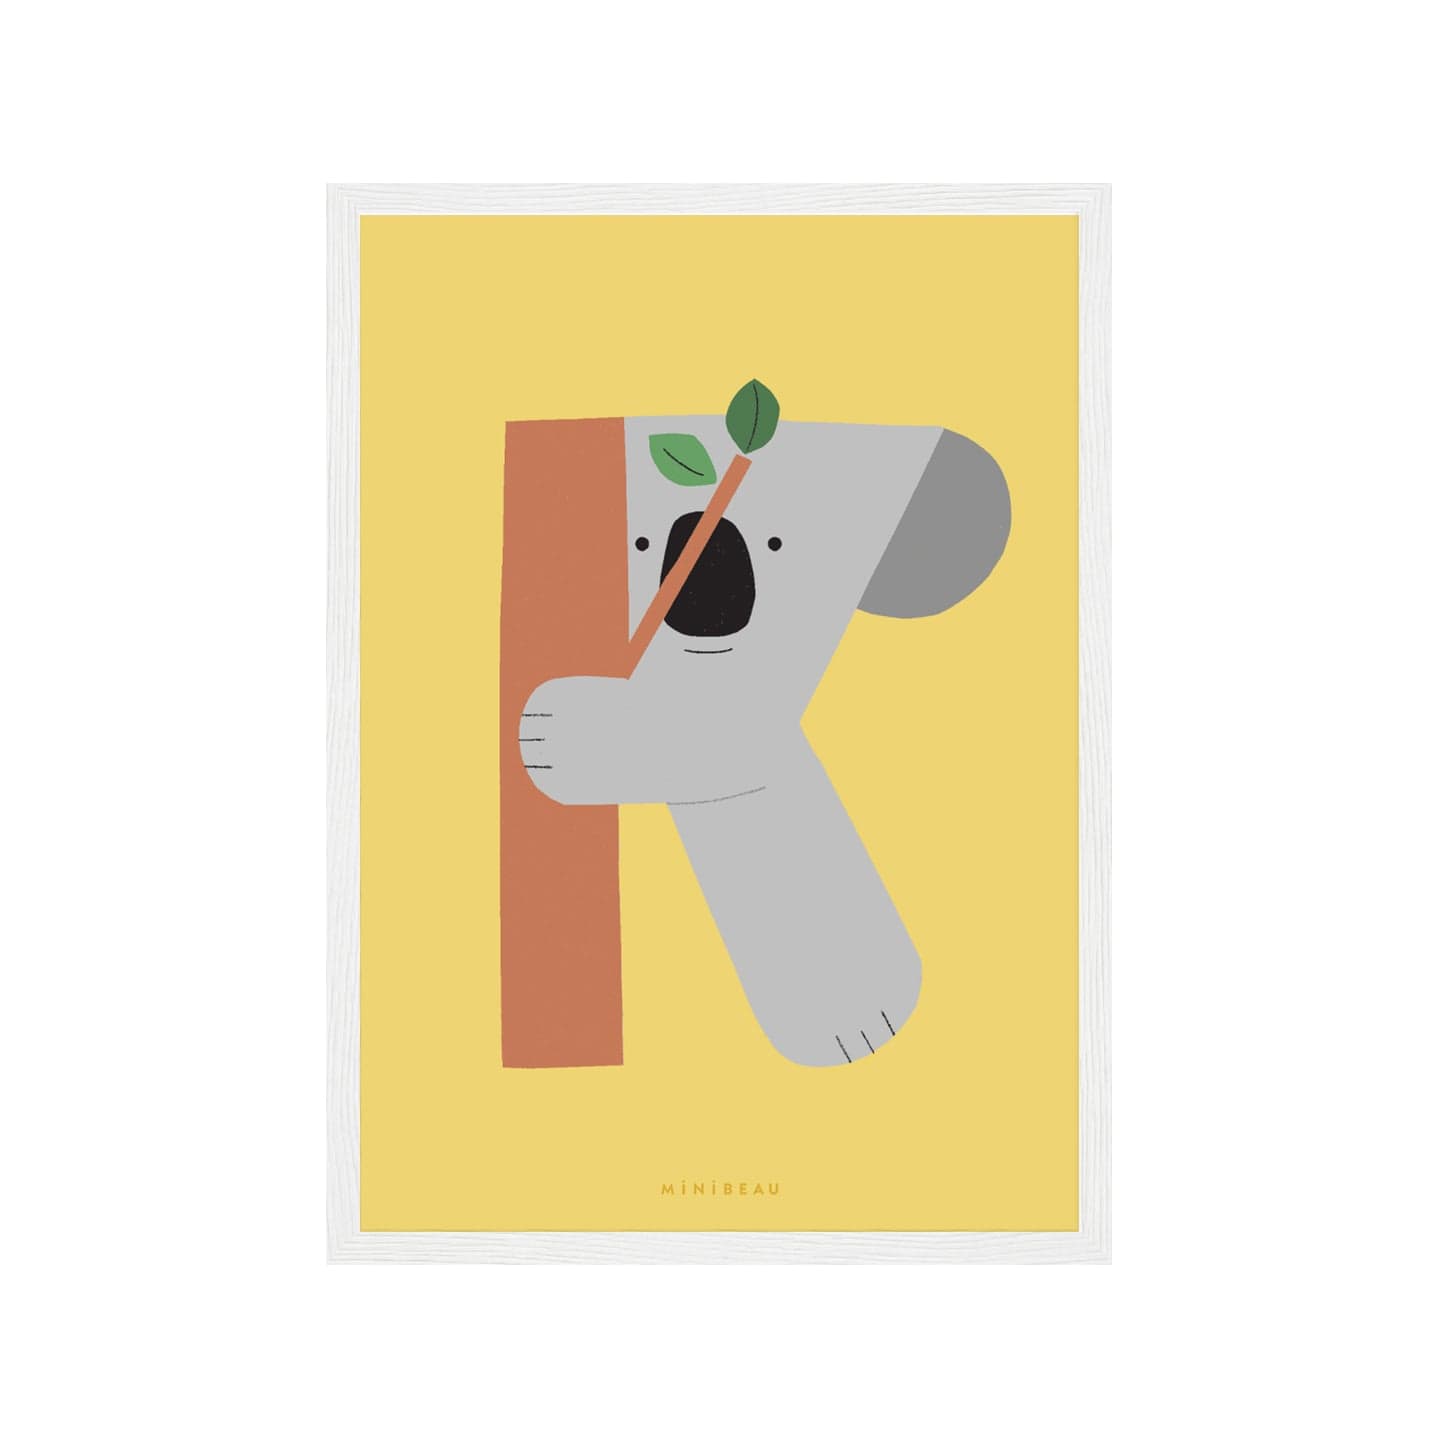 Art print in a white frame. Our Happy Alphabet 'K' Art Print shows a smiling grey koala climbing a tree, making a K on a yellow background.